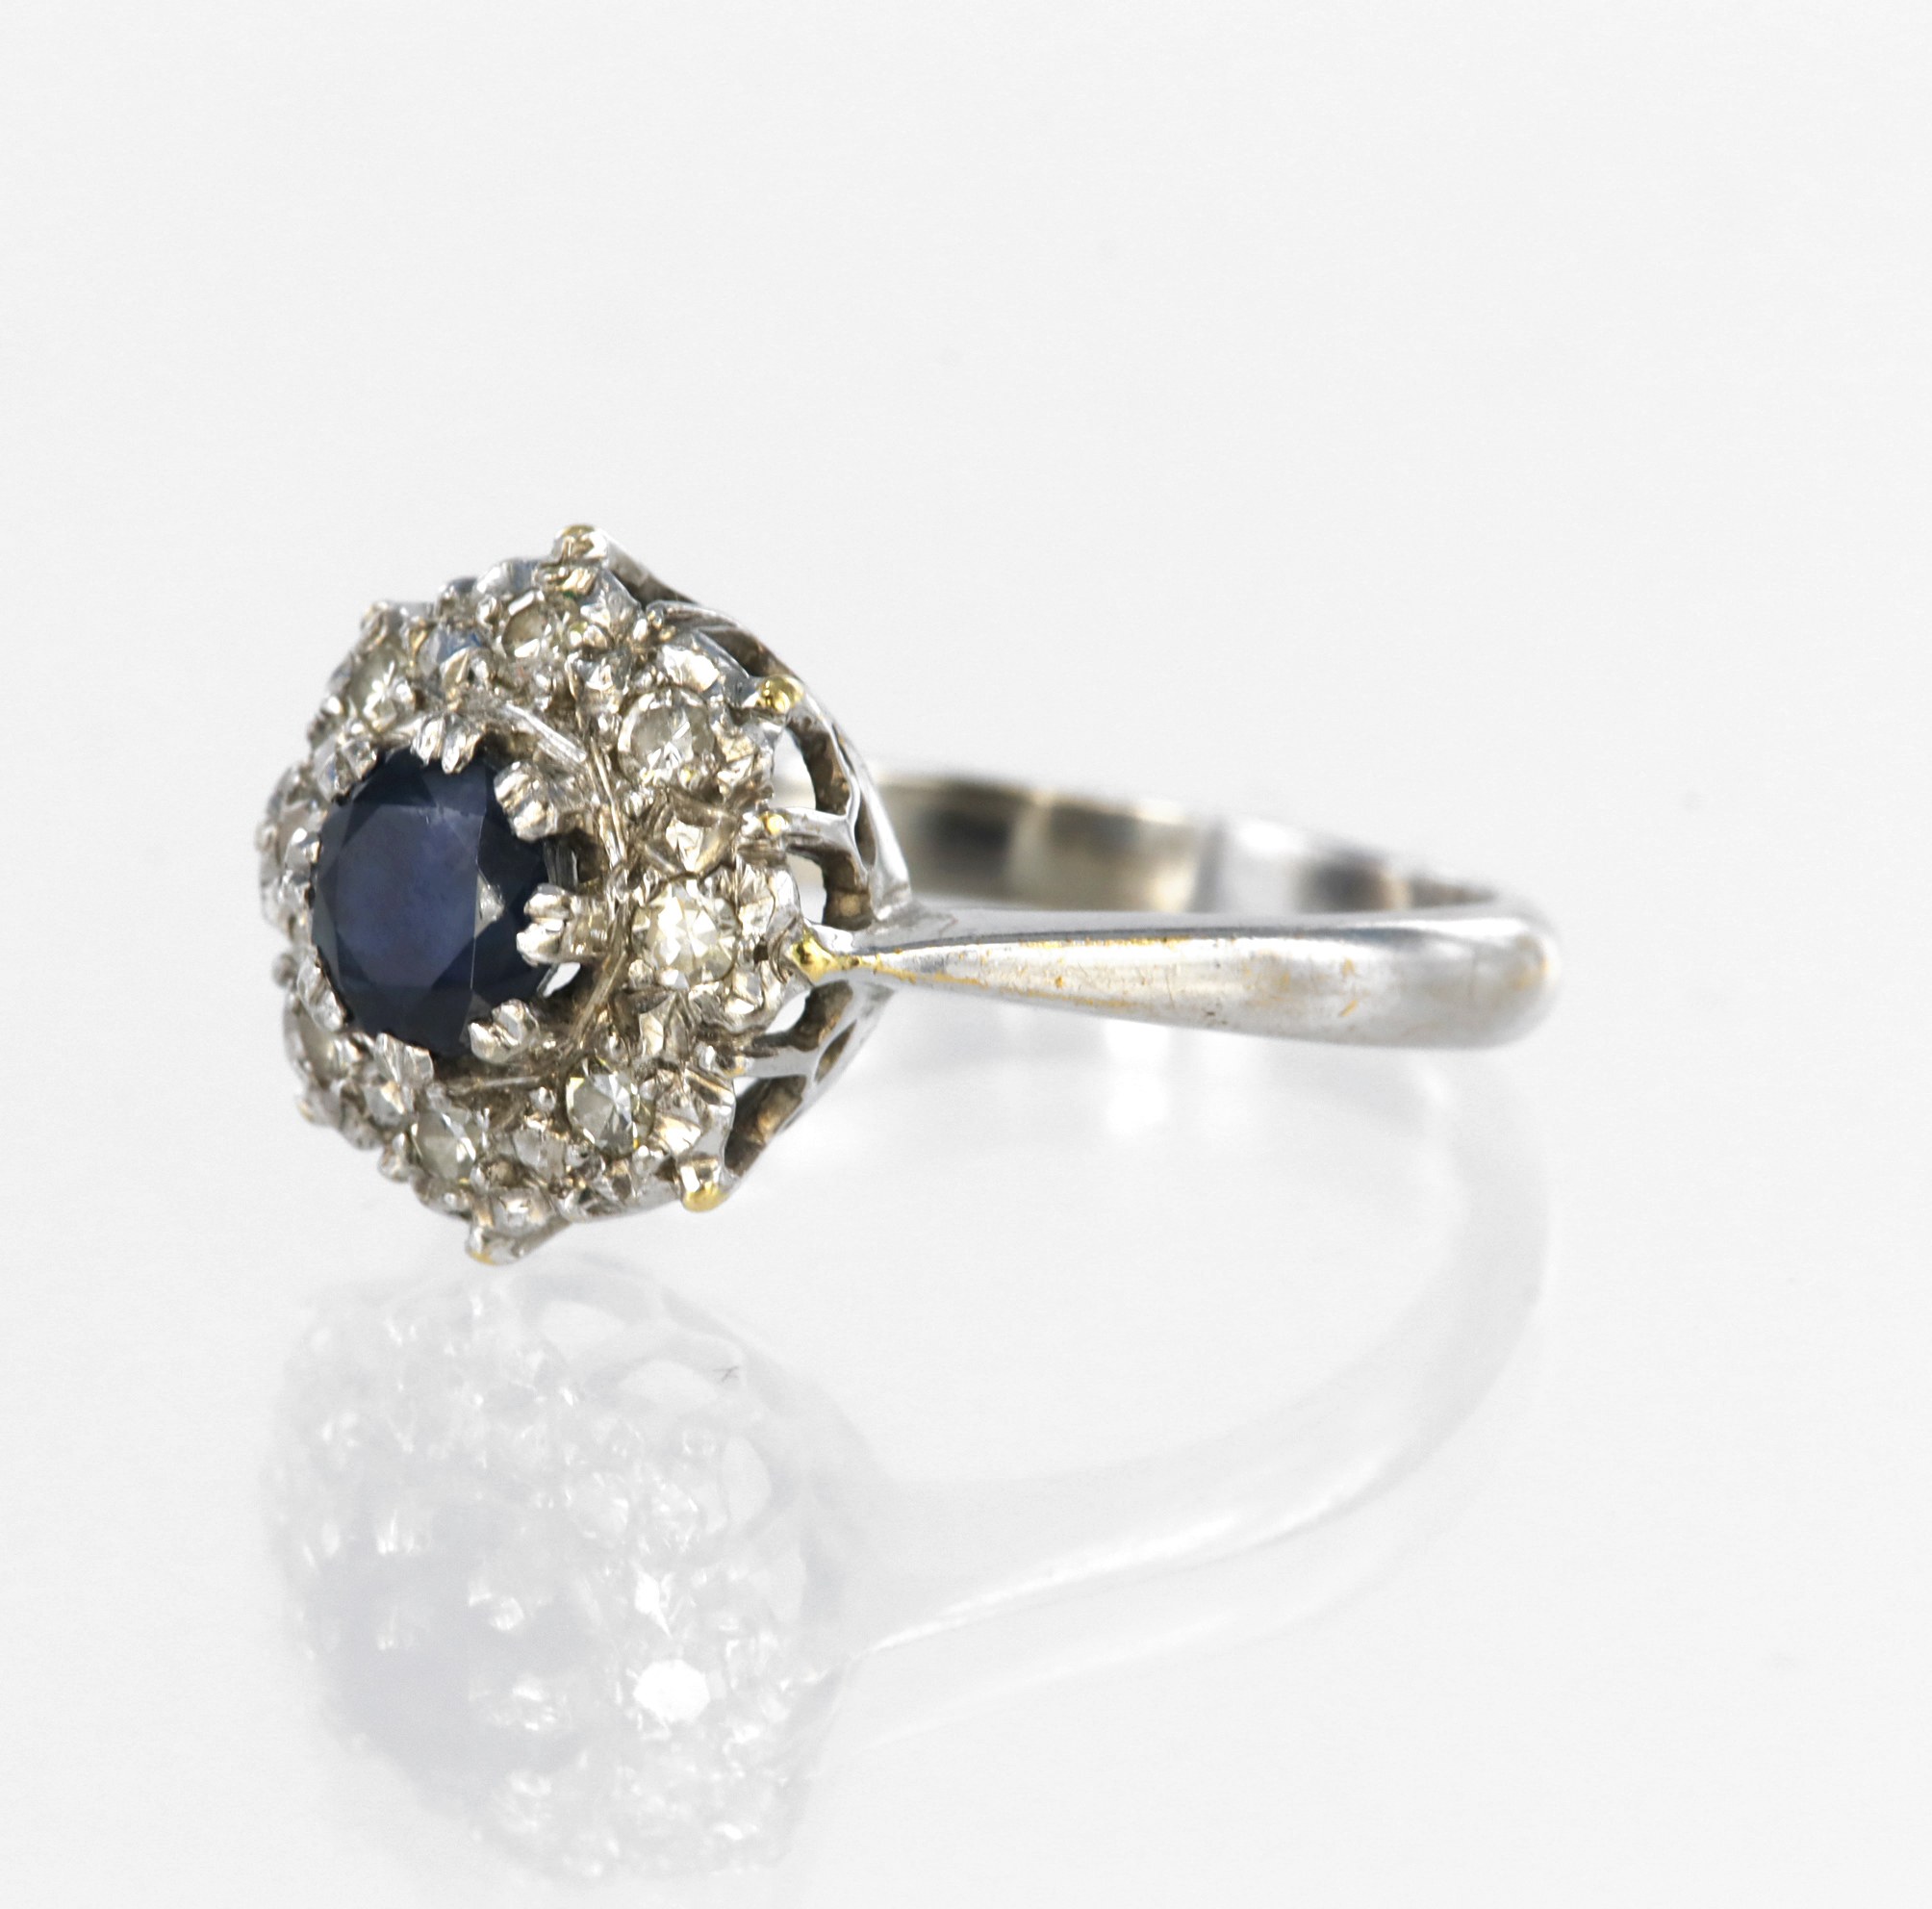 18ct white gold cluster ring set with a central round sapphire measuring approx. 5mm diameter - Image 2 of 2